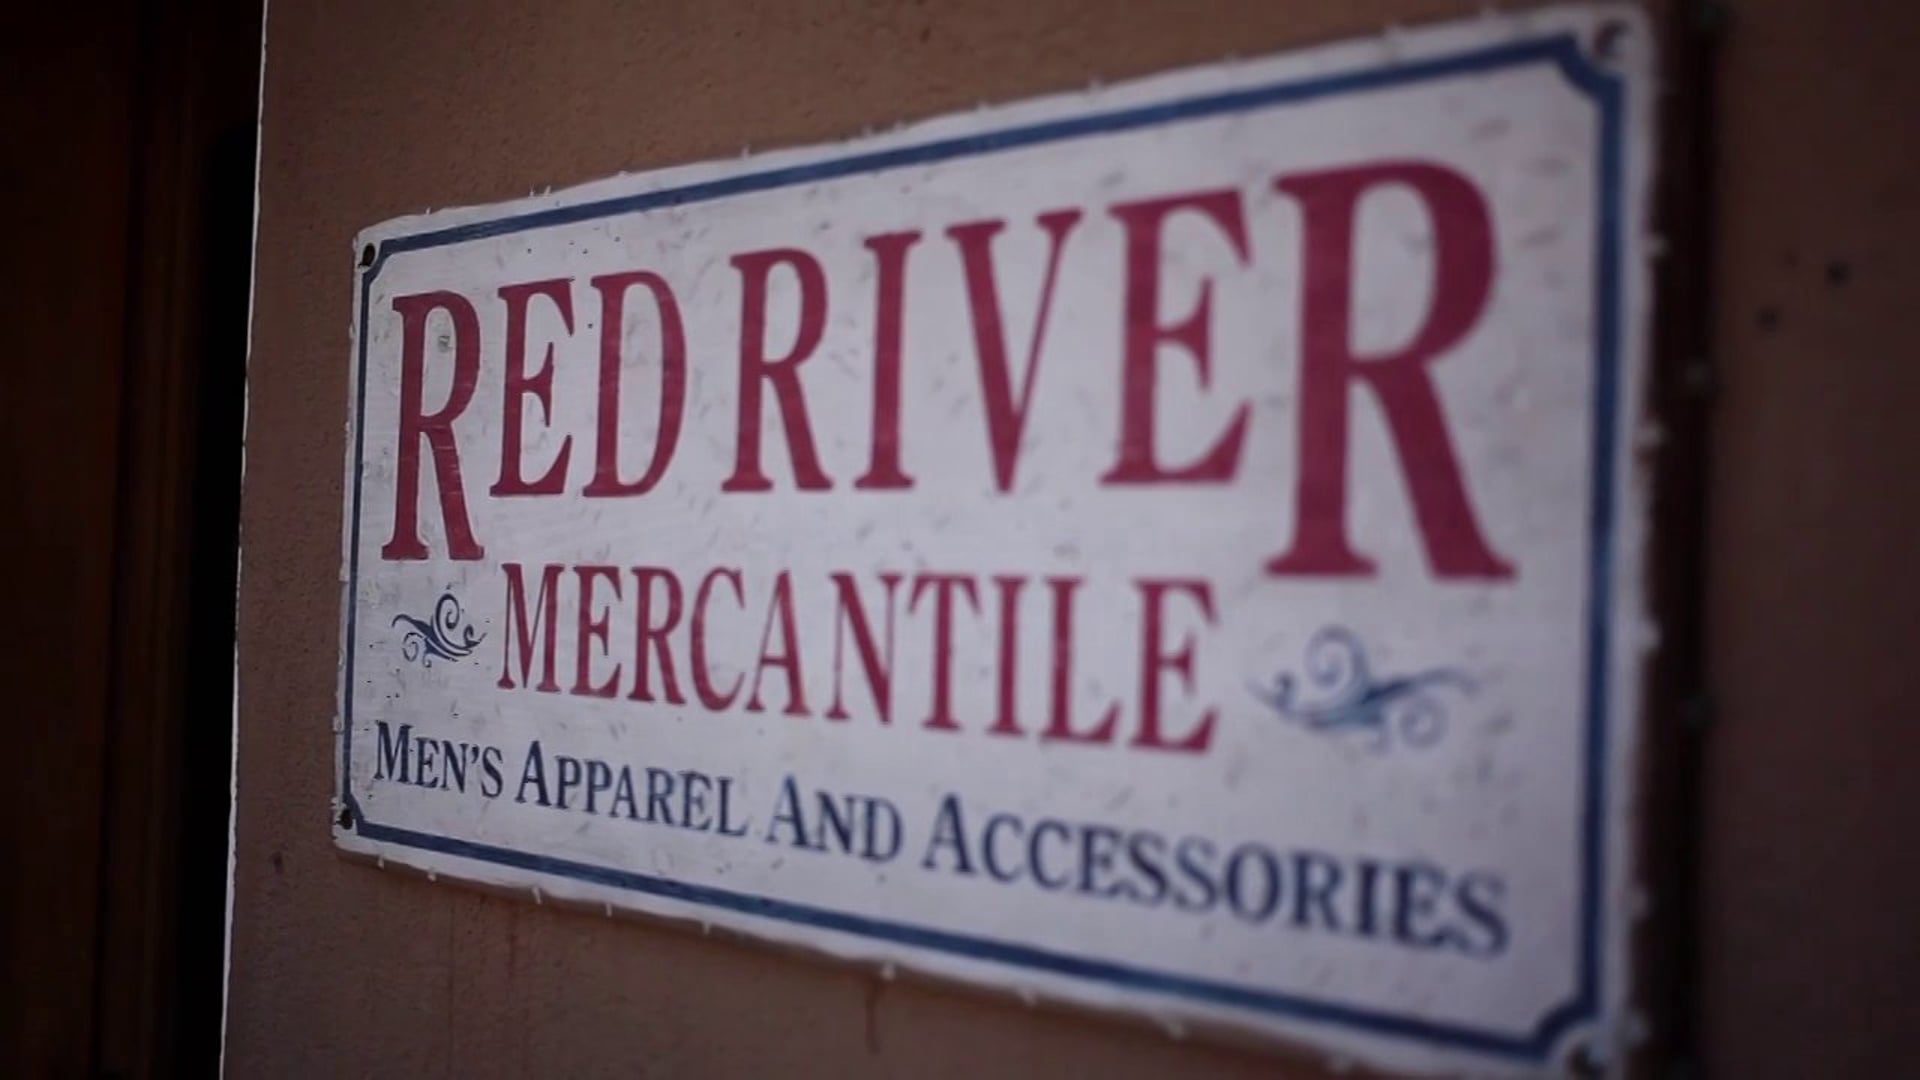 Red River Mercantile Fall 2013